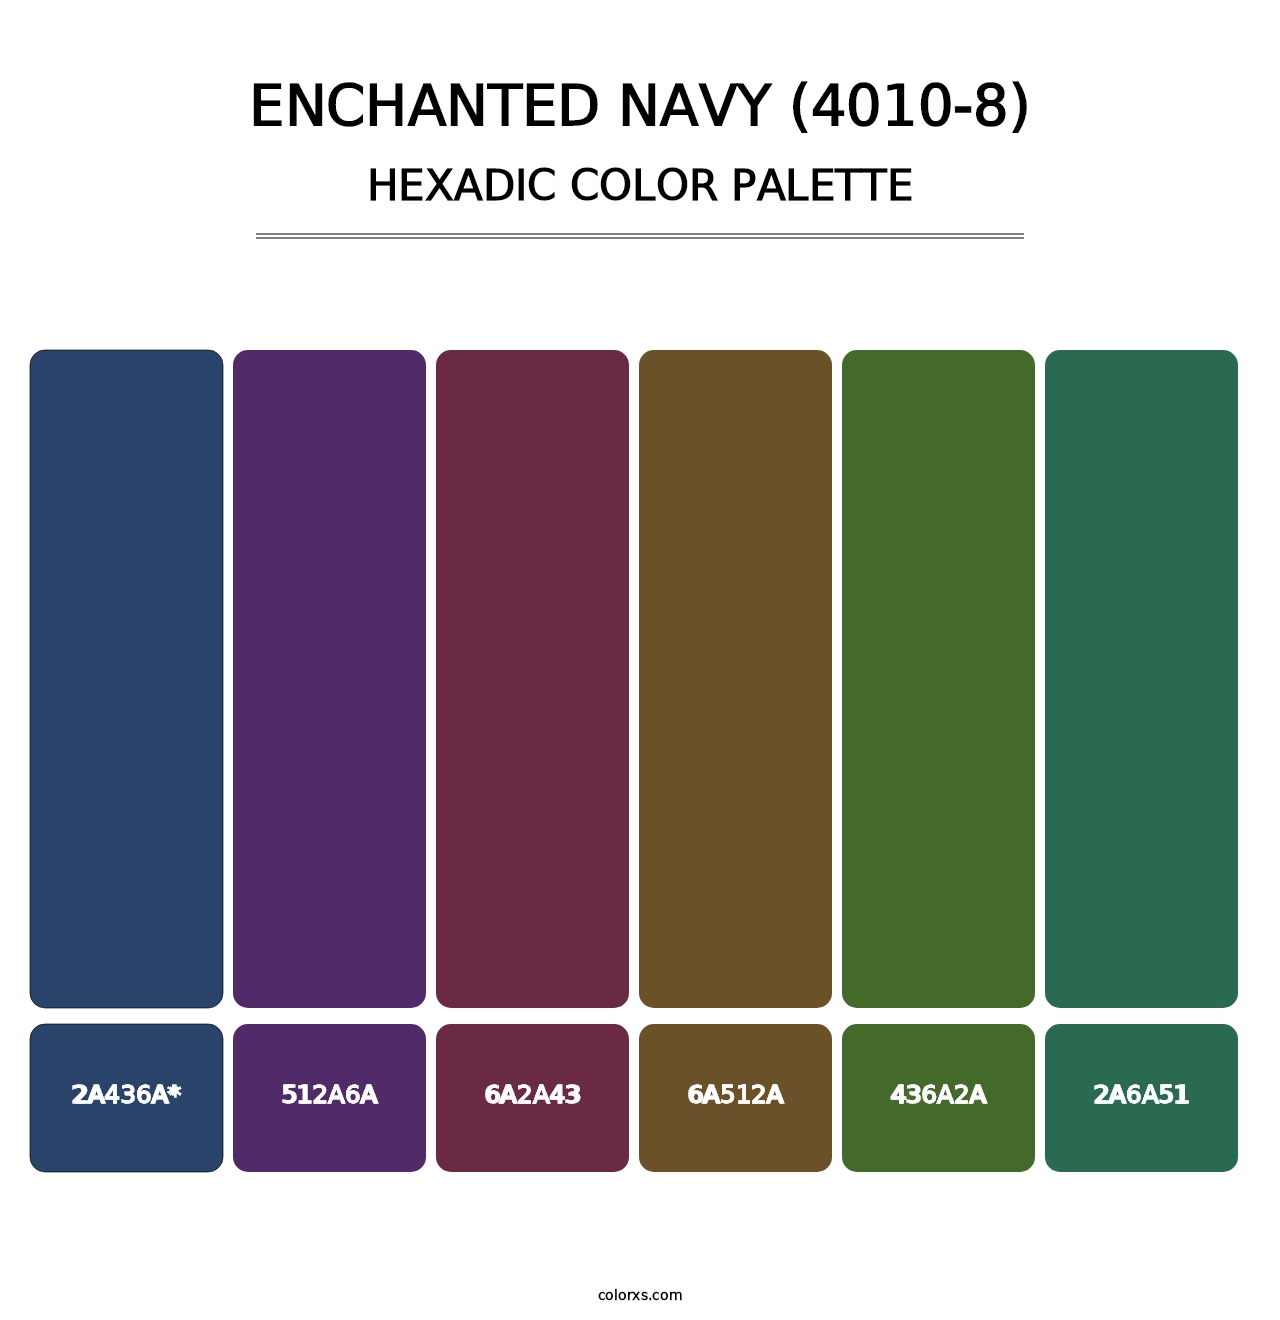 Enchanted Navy (4010-8) - Hexadic Color Palette